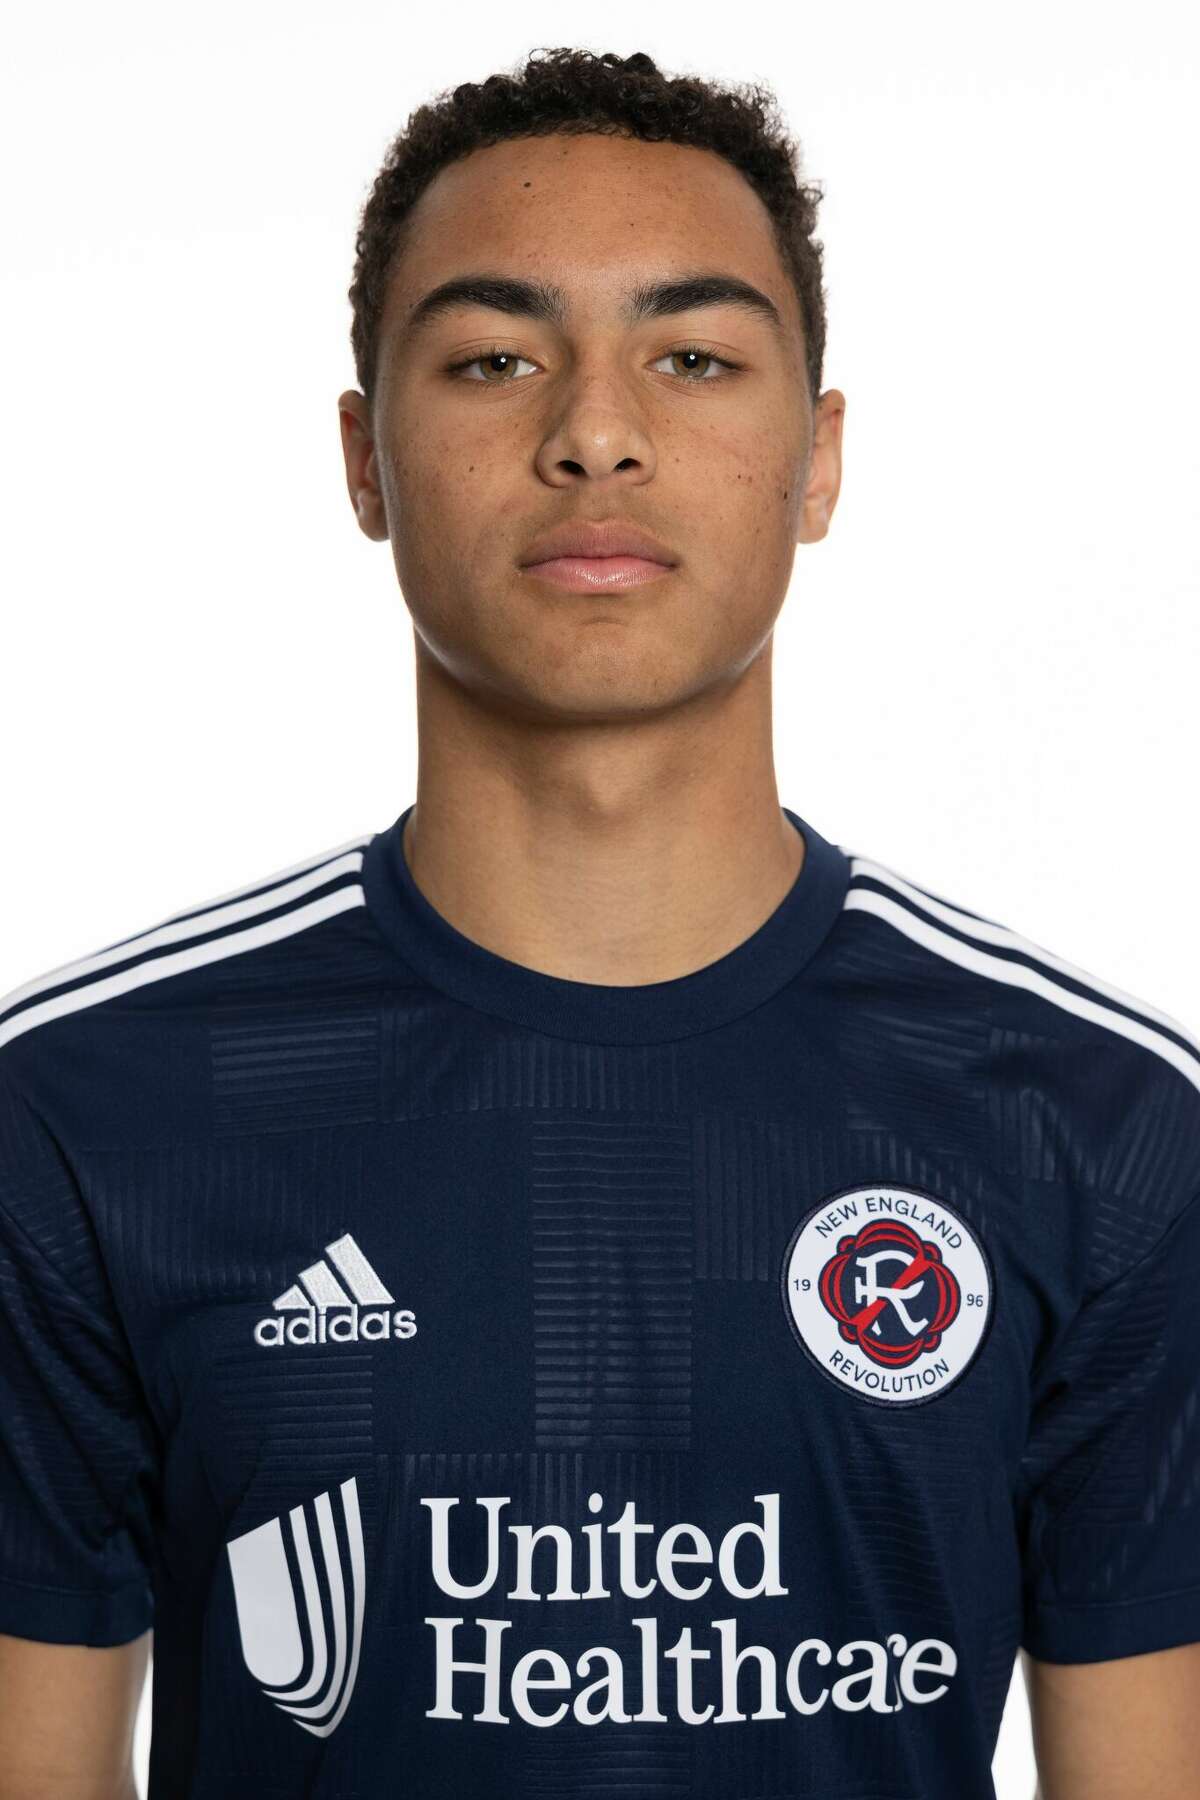 Connecticut teenager signs with New England Revolution soccer team 